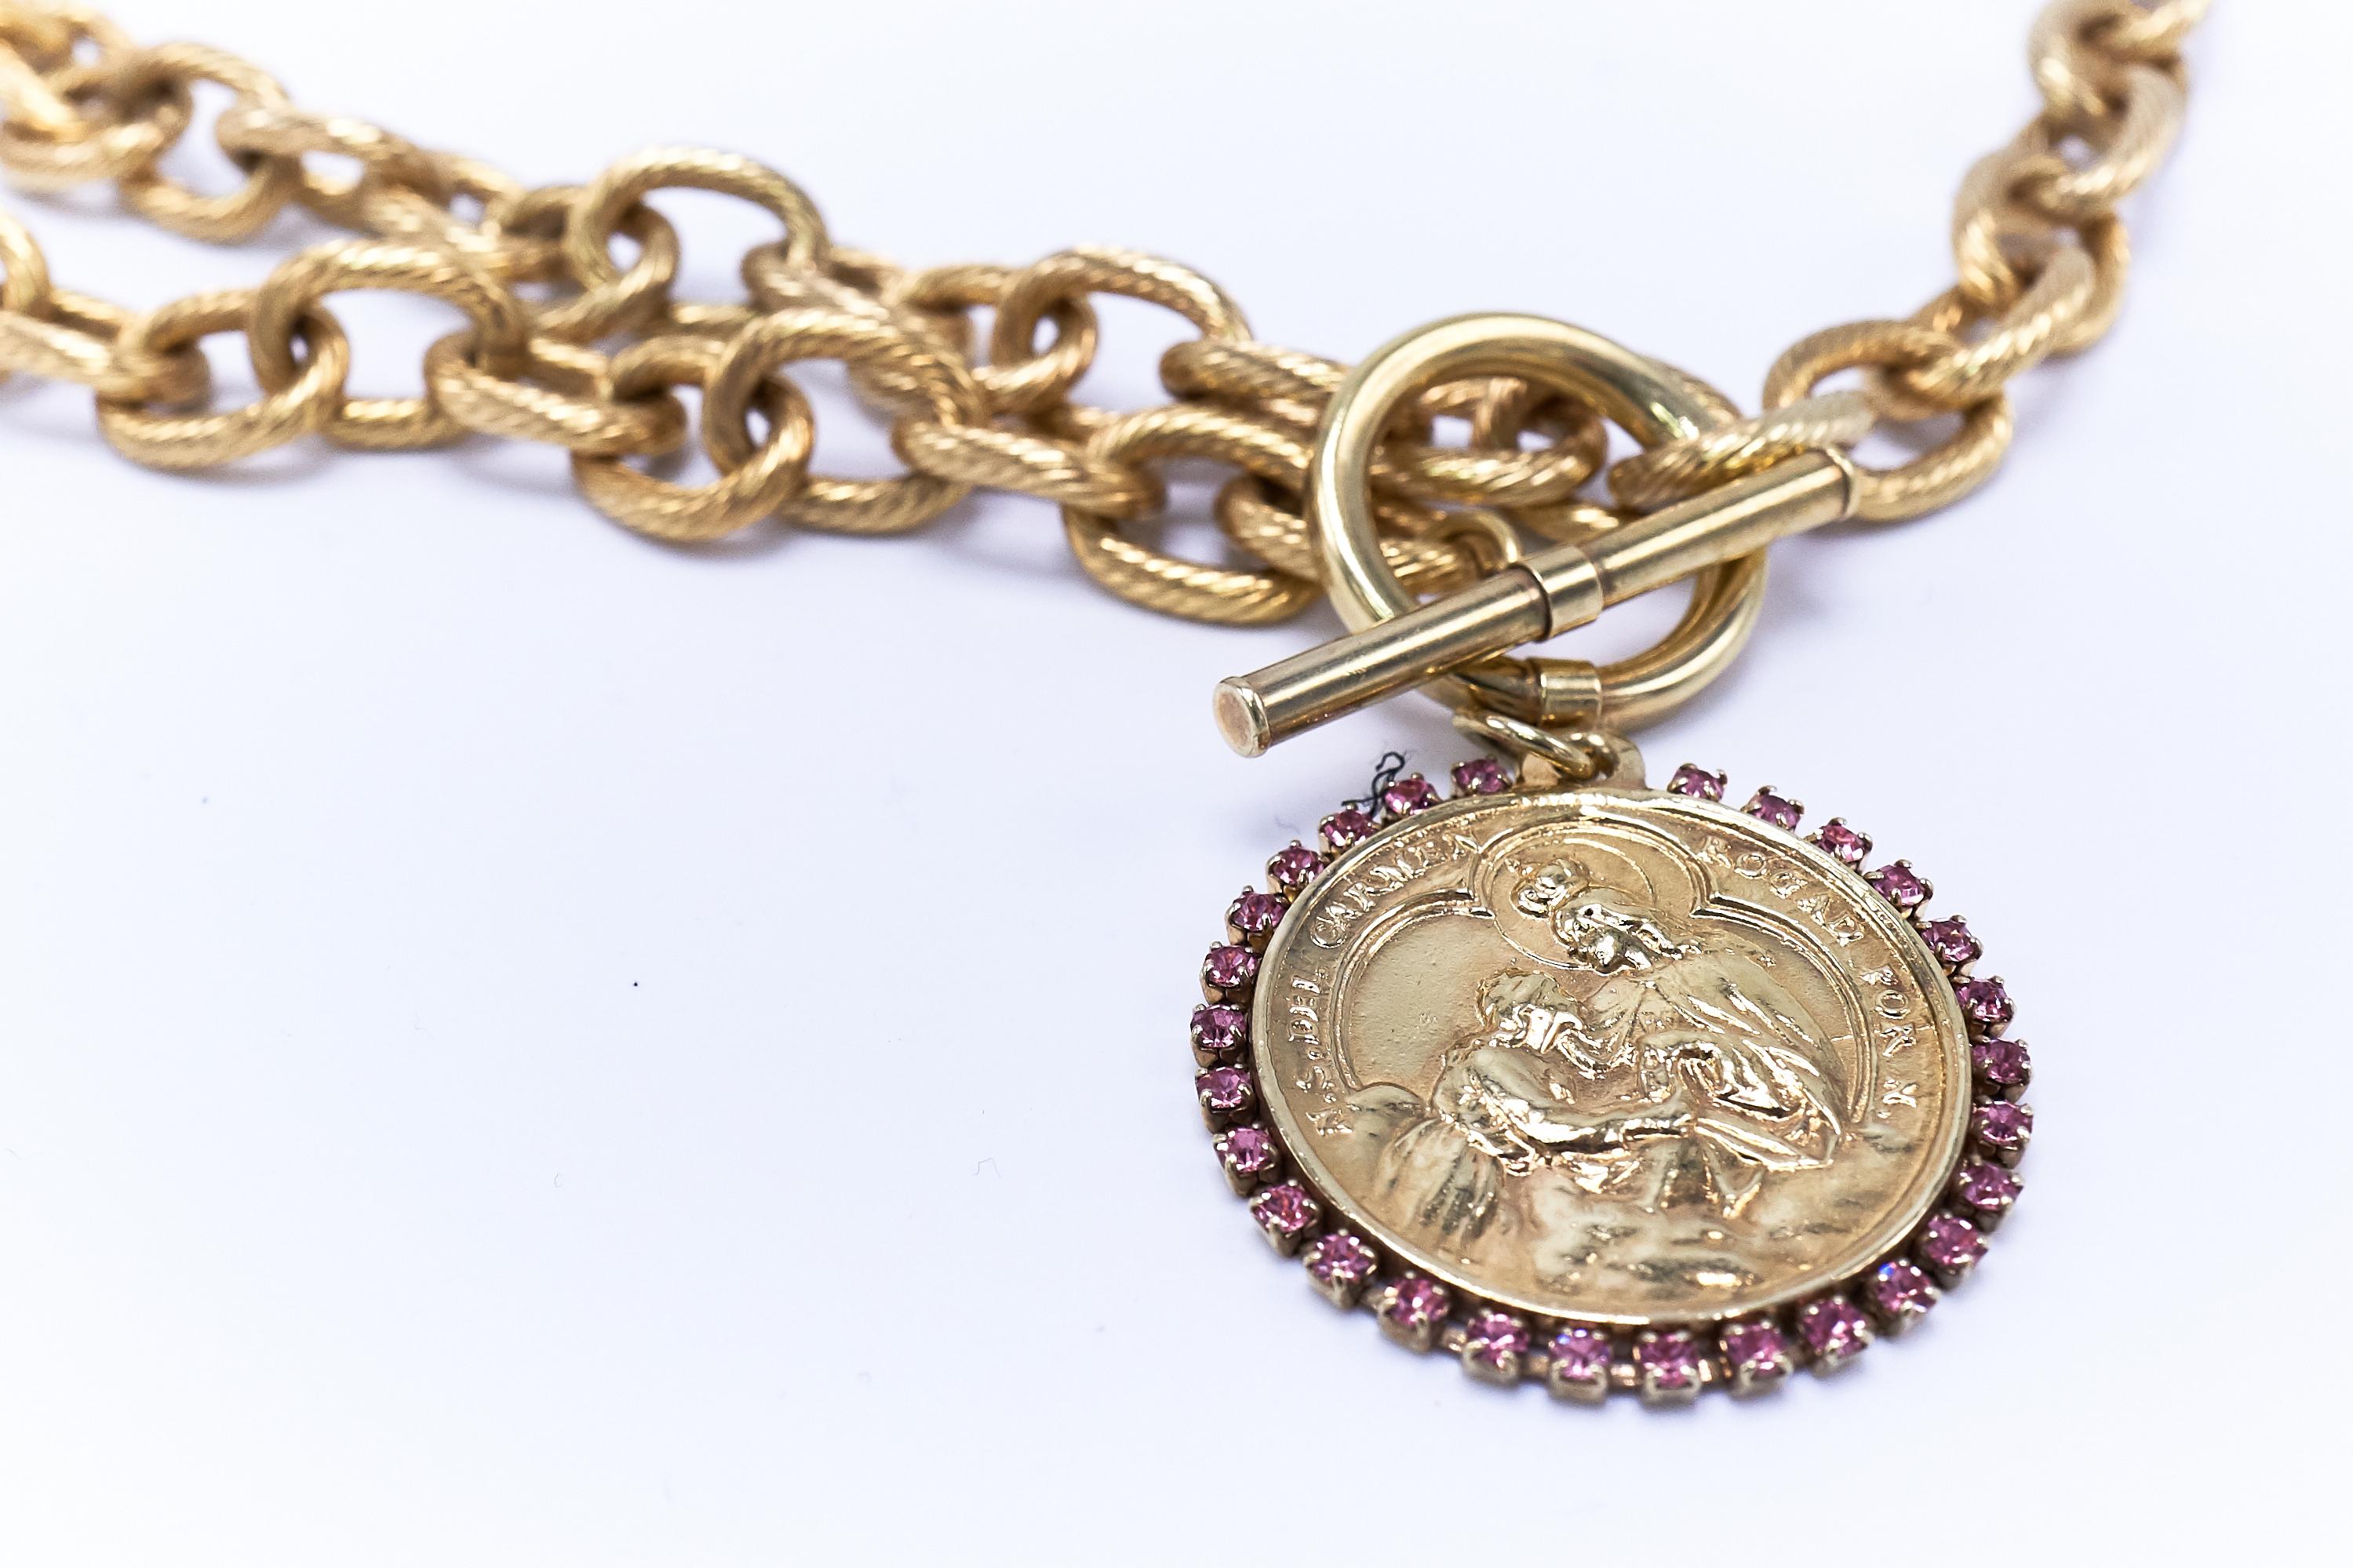 Choker Chain Necklace Medal Rhinestone Gold Plated Virgin Mary Pendant J Dauphin

J DAUPHIN necklace 